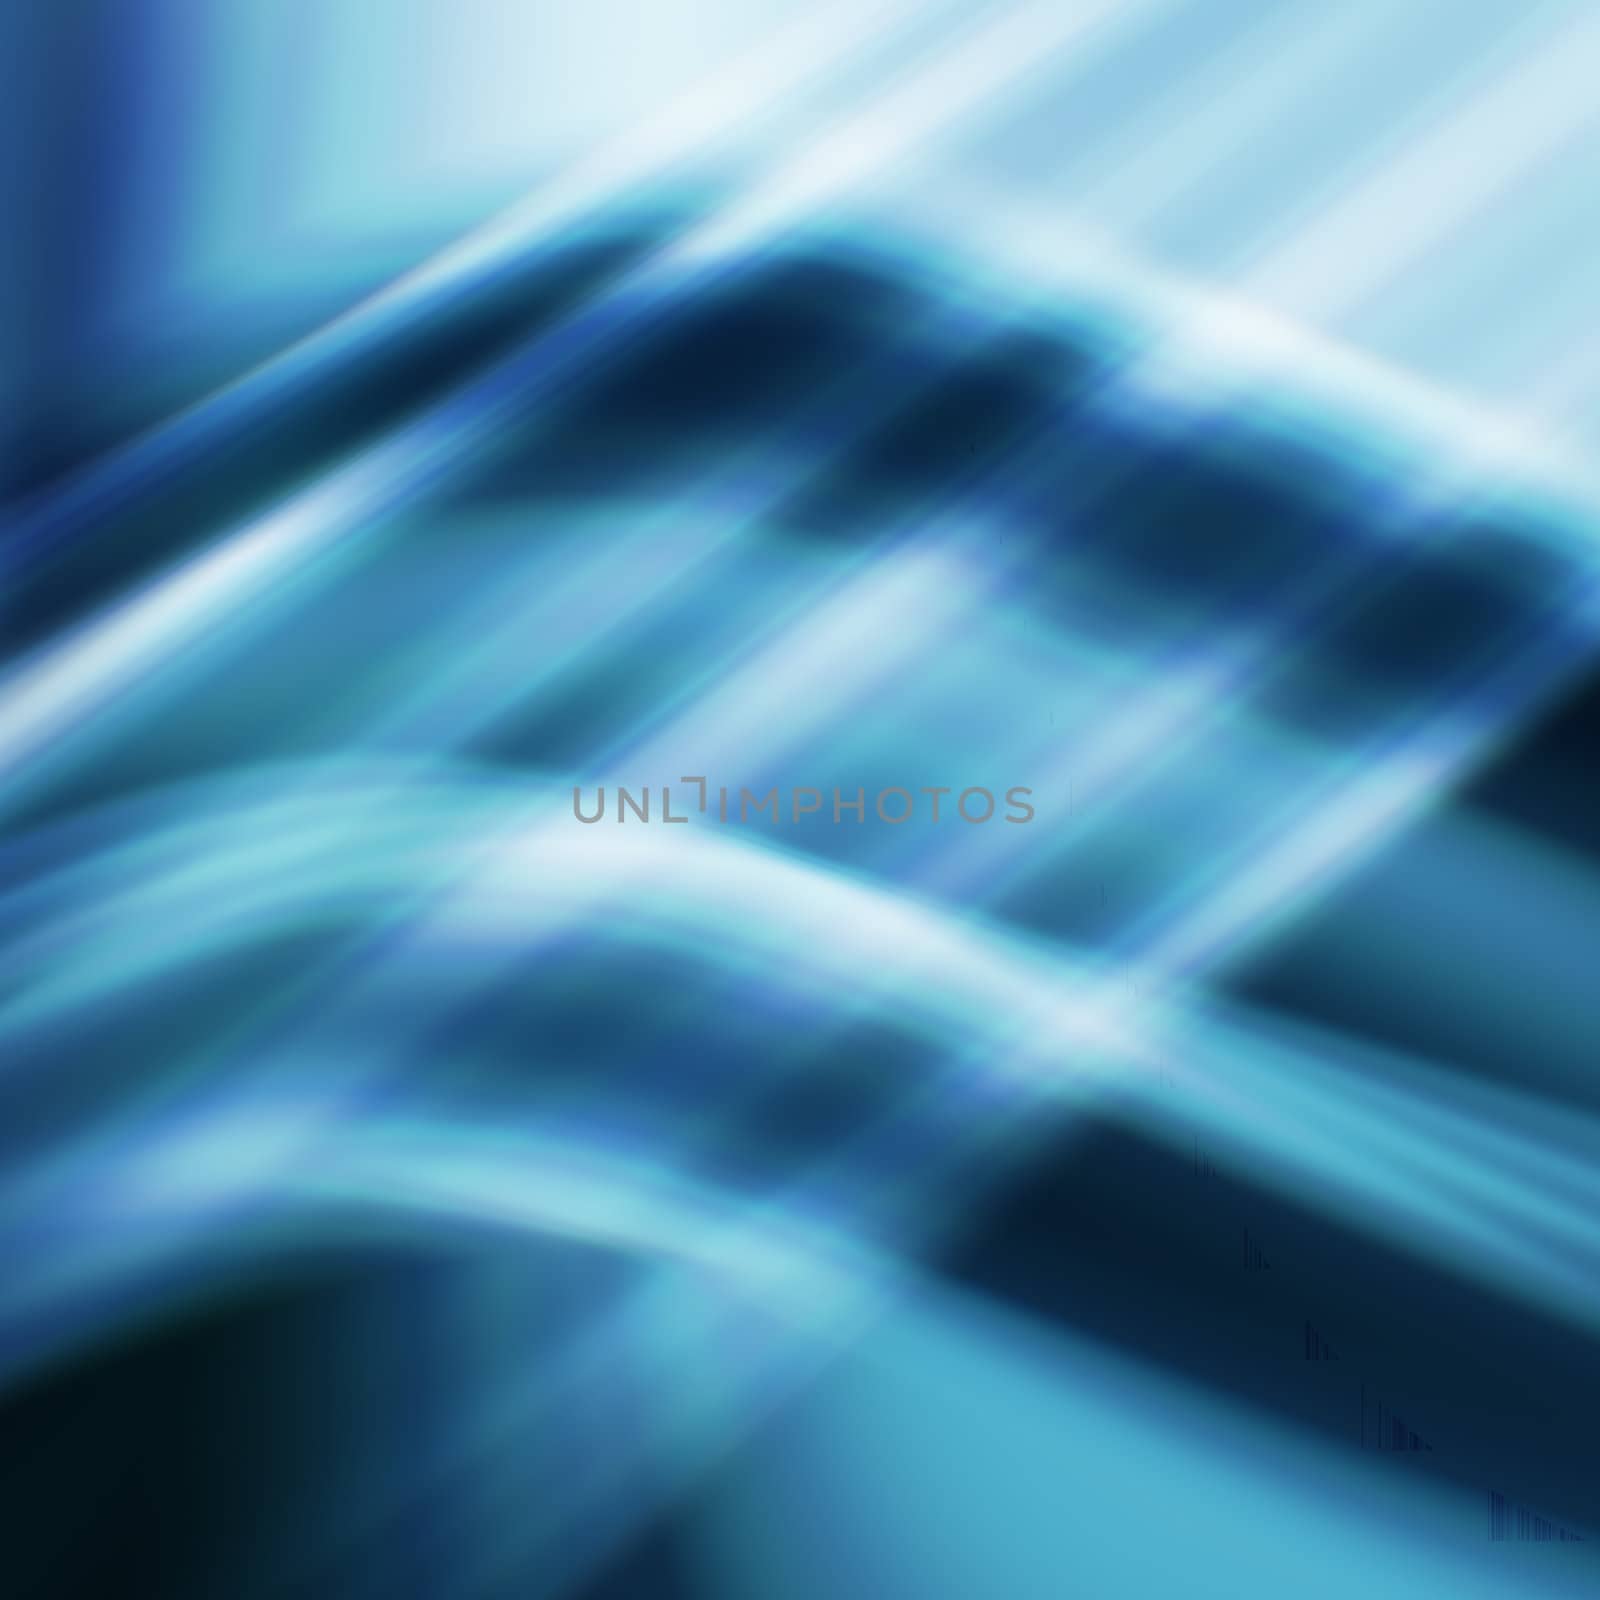 An image of a blue wave background